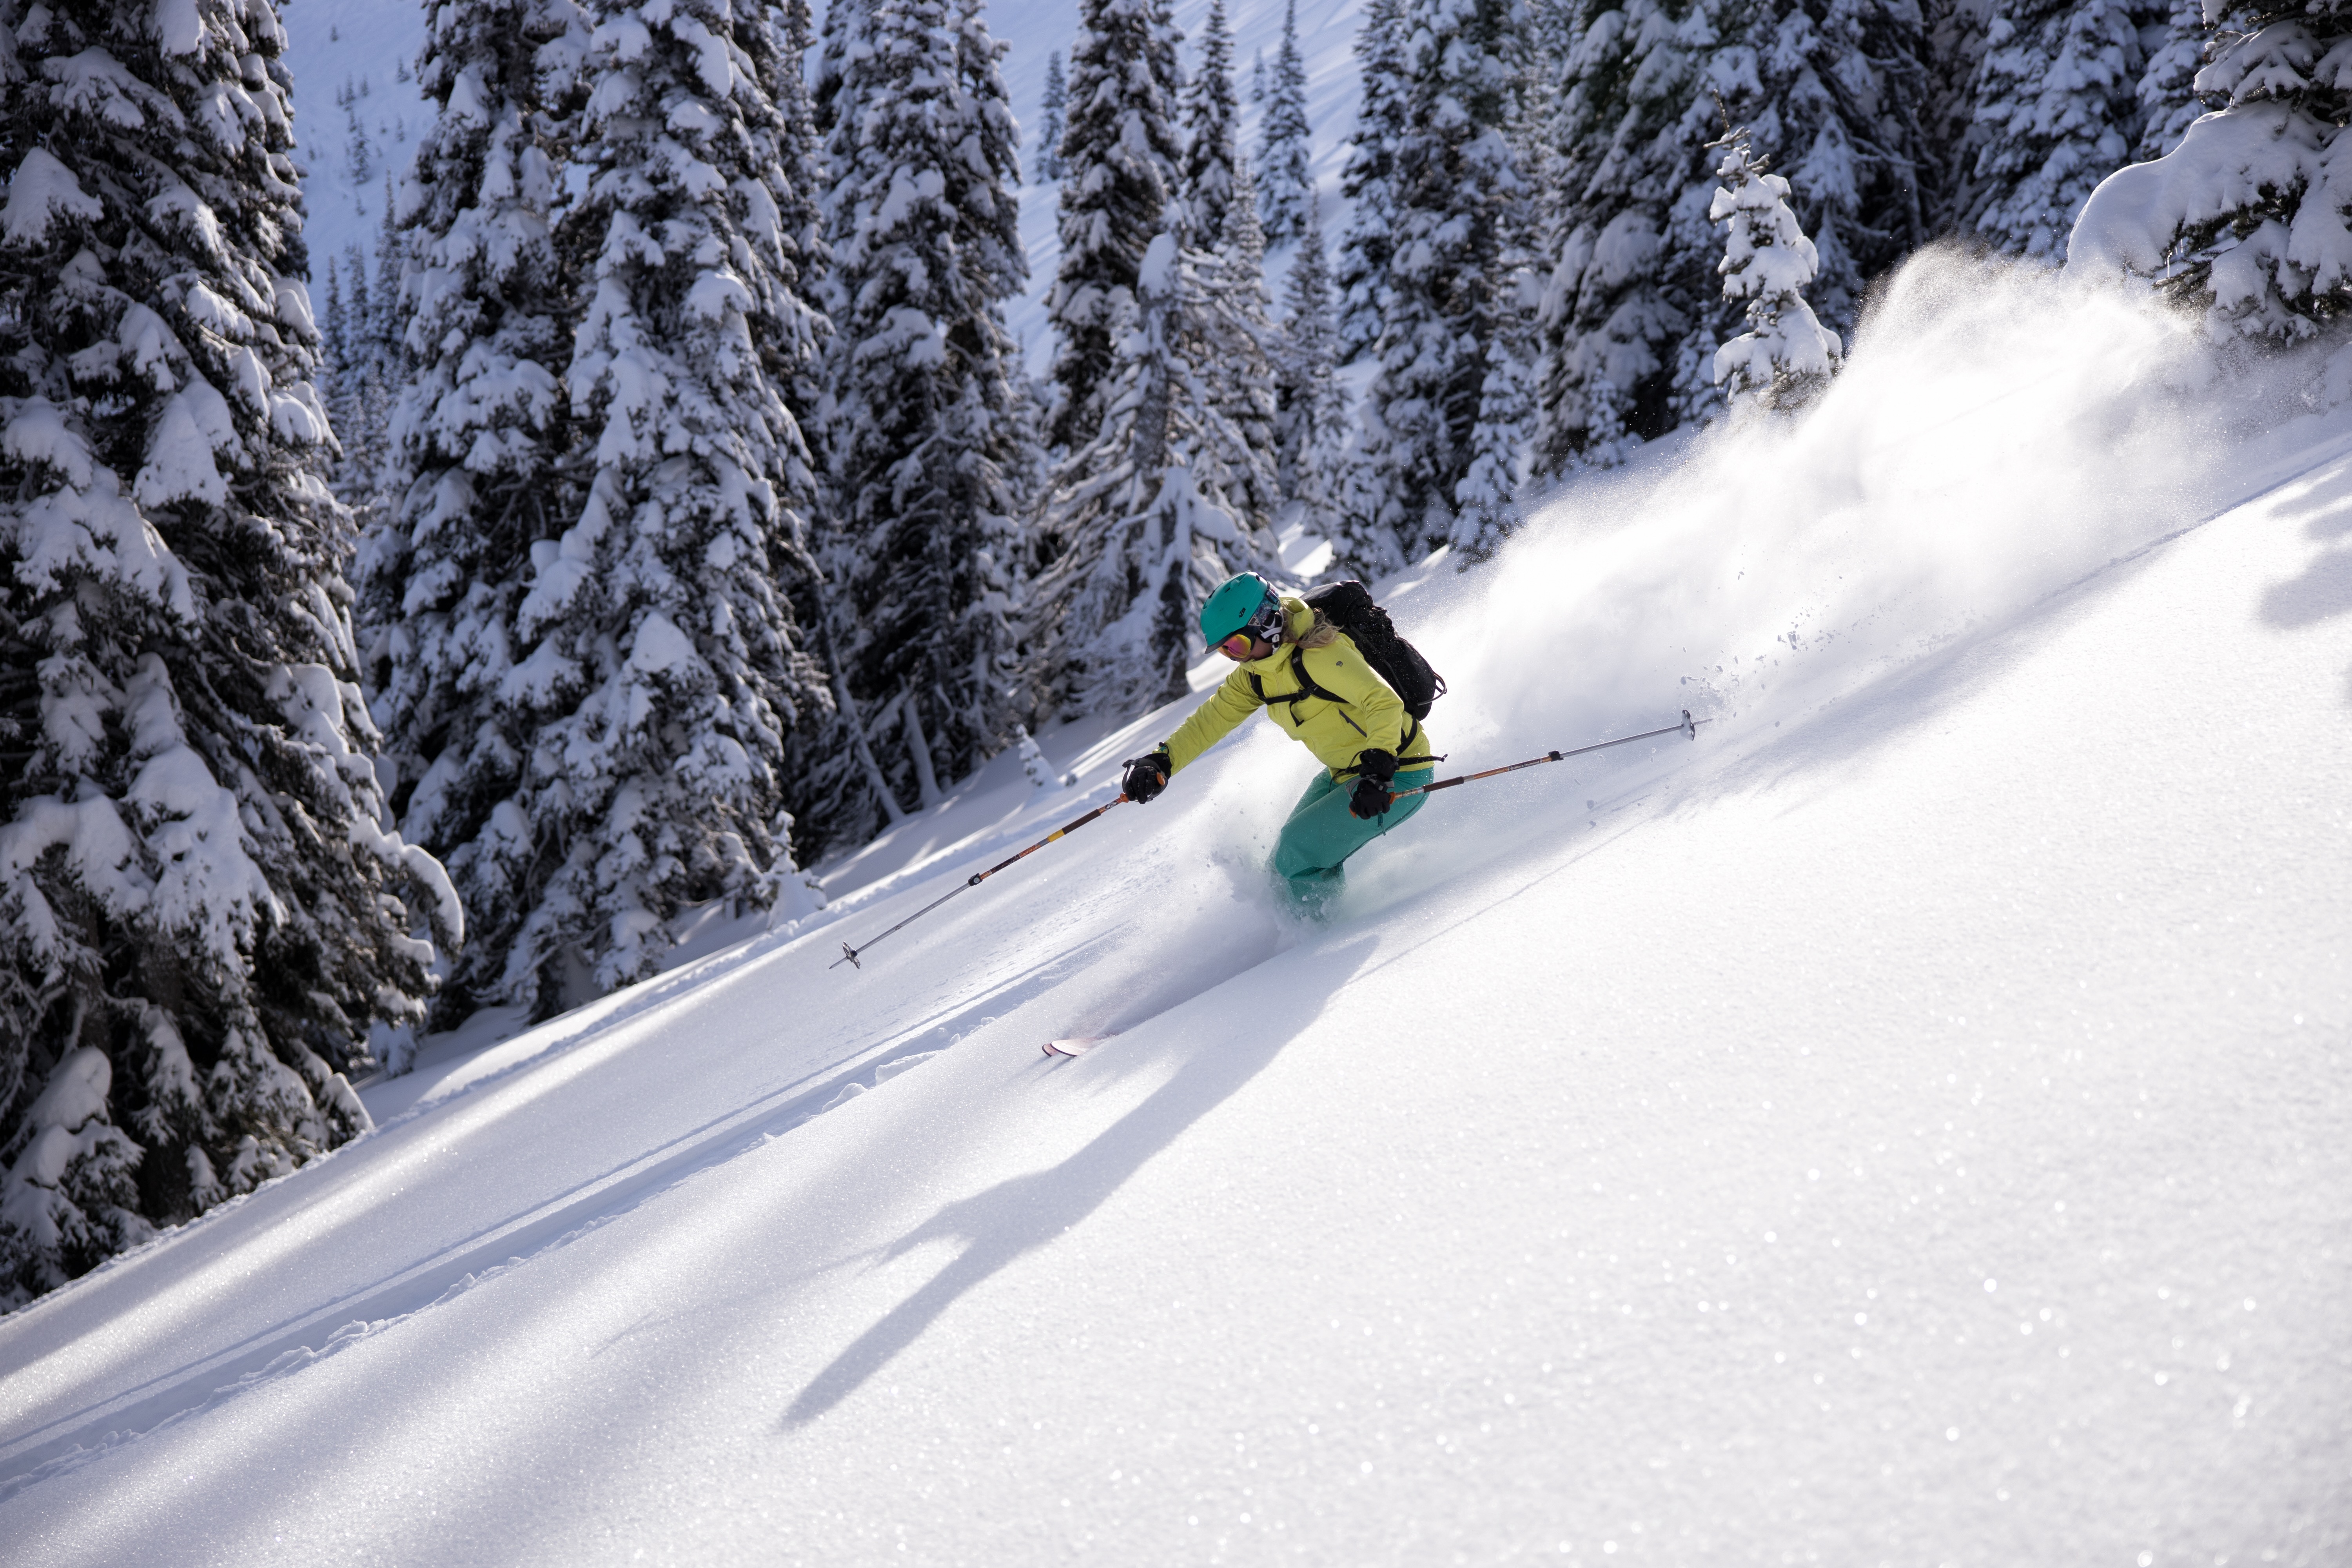 Kristina Ciari skiing the powder-filled side-country of Crystal Mountain.